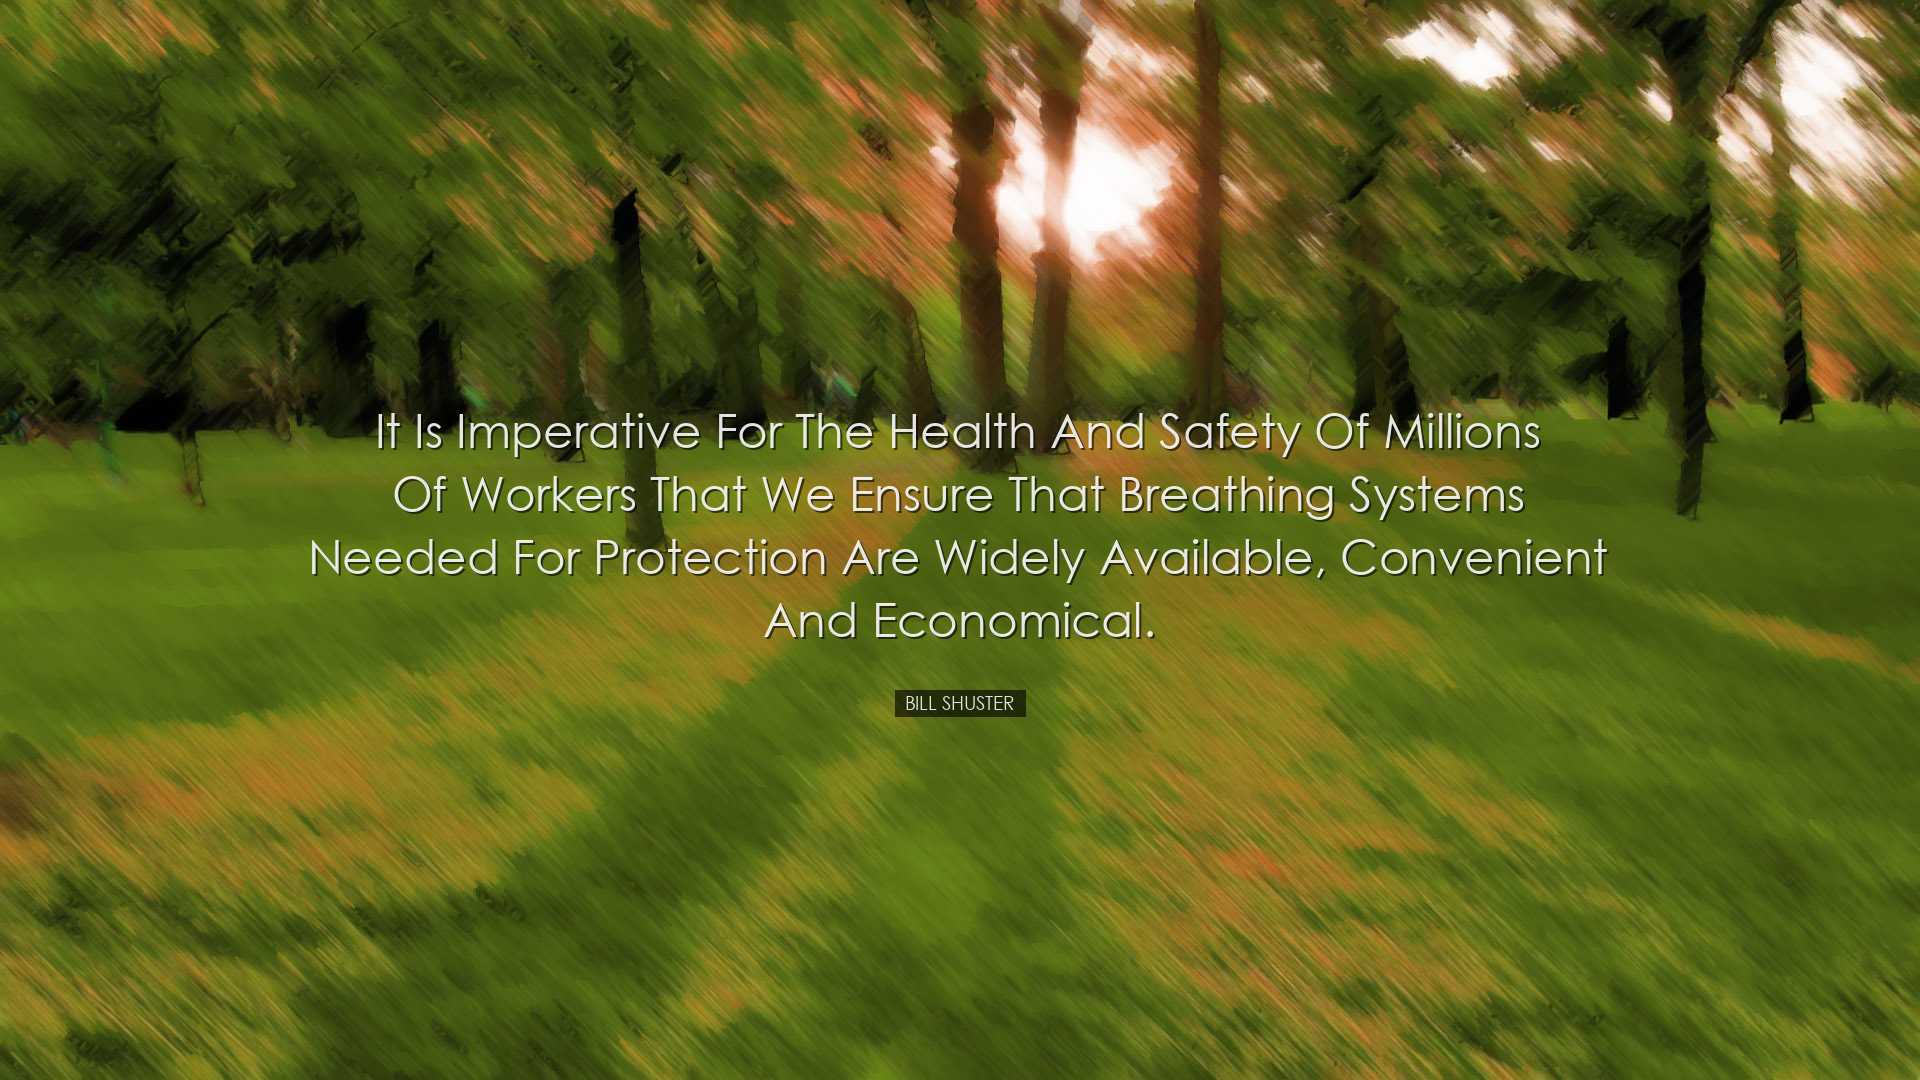 It is imperative for the health and safety of millions of workers